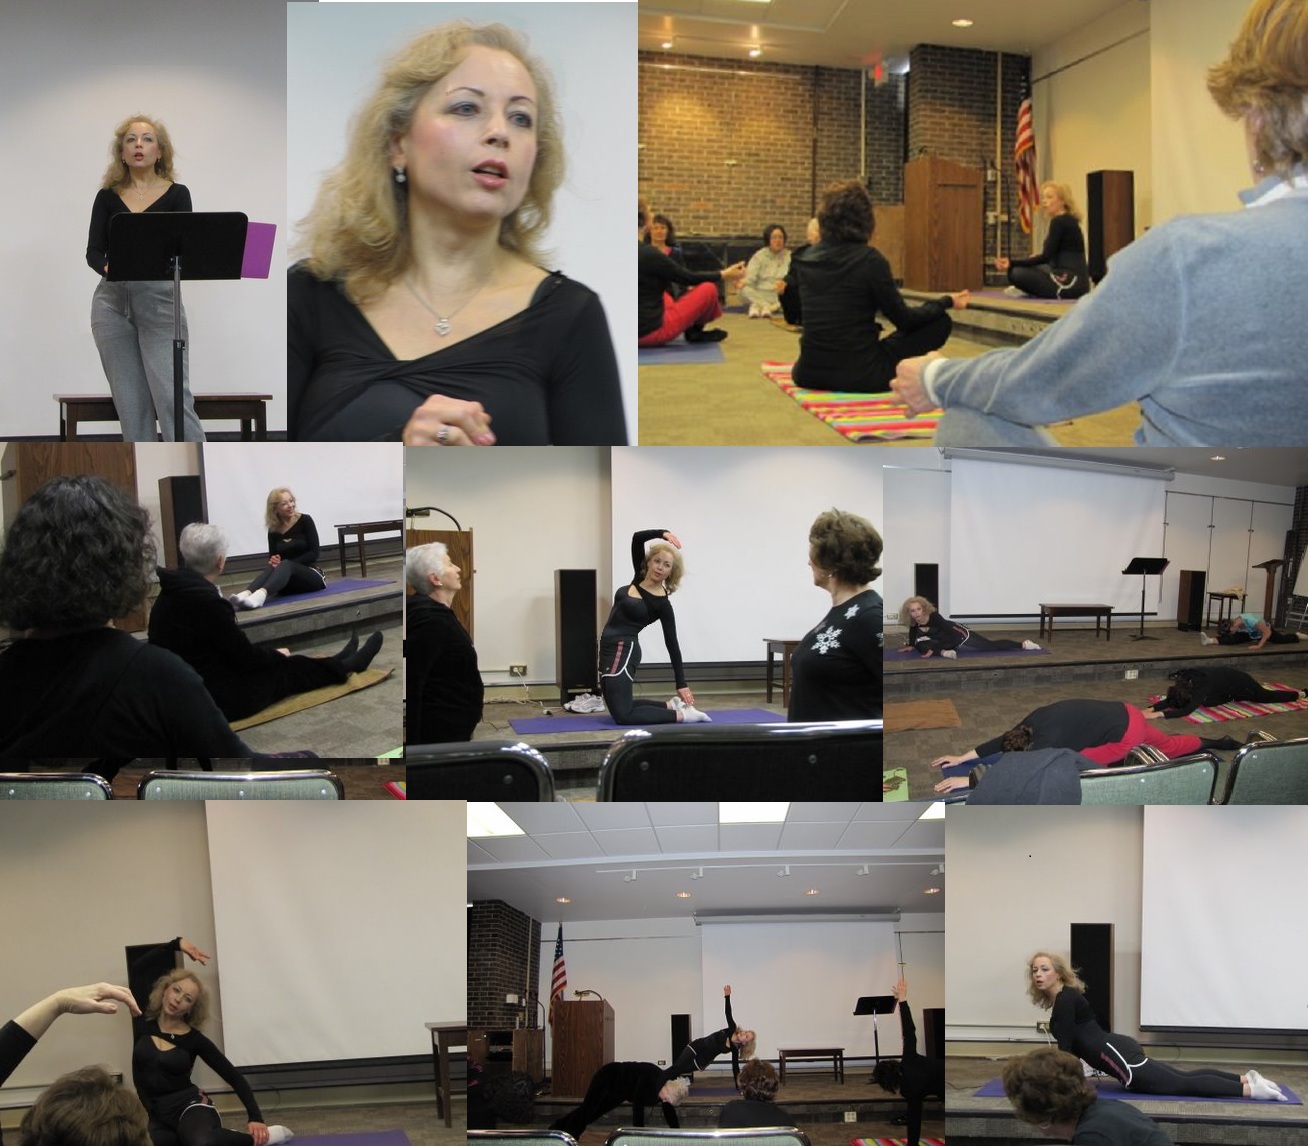 Conducting 'Yoga for Musicians' Lecture/Workshop for Music Educators Association of NJ